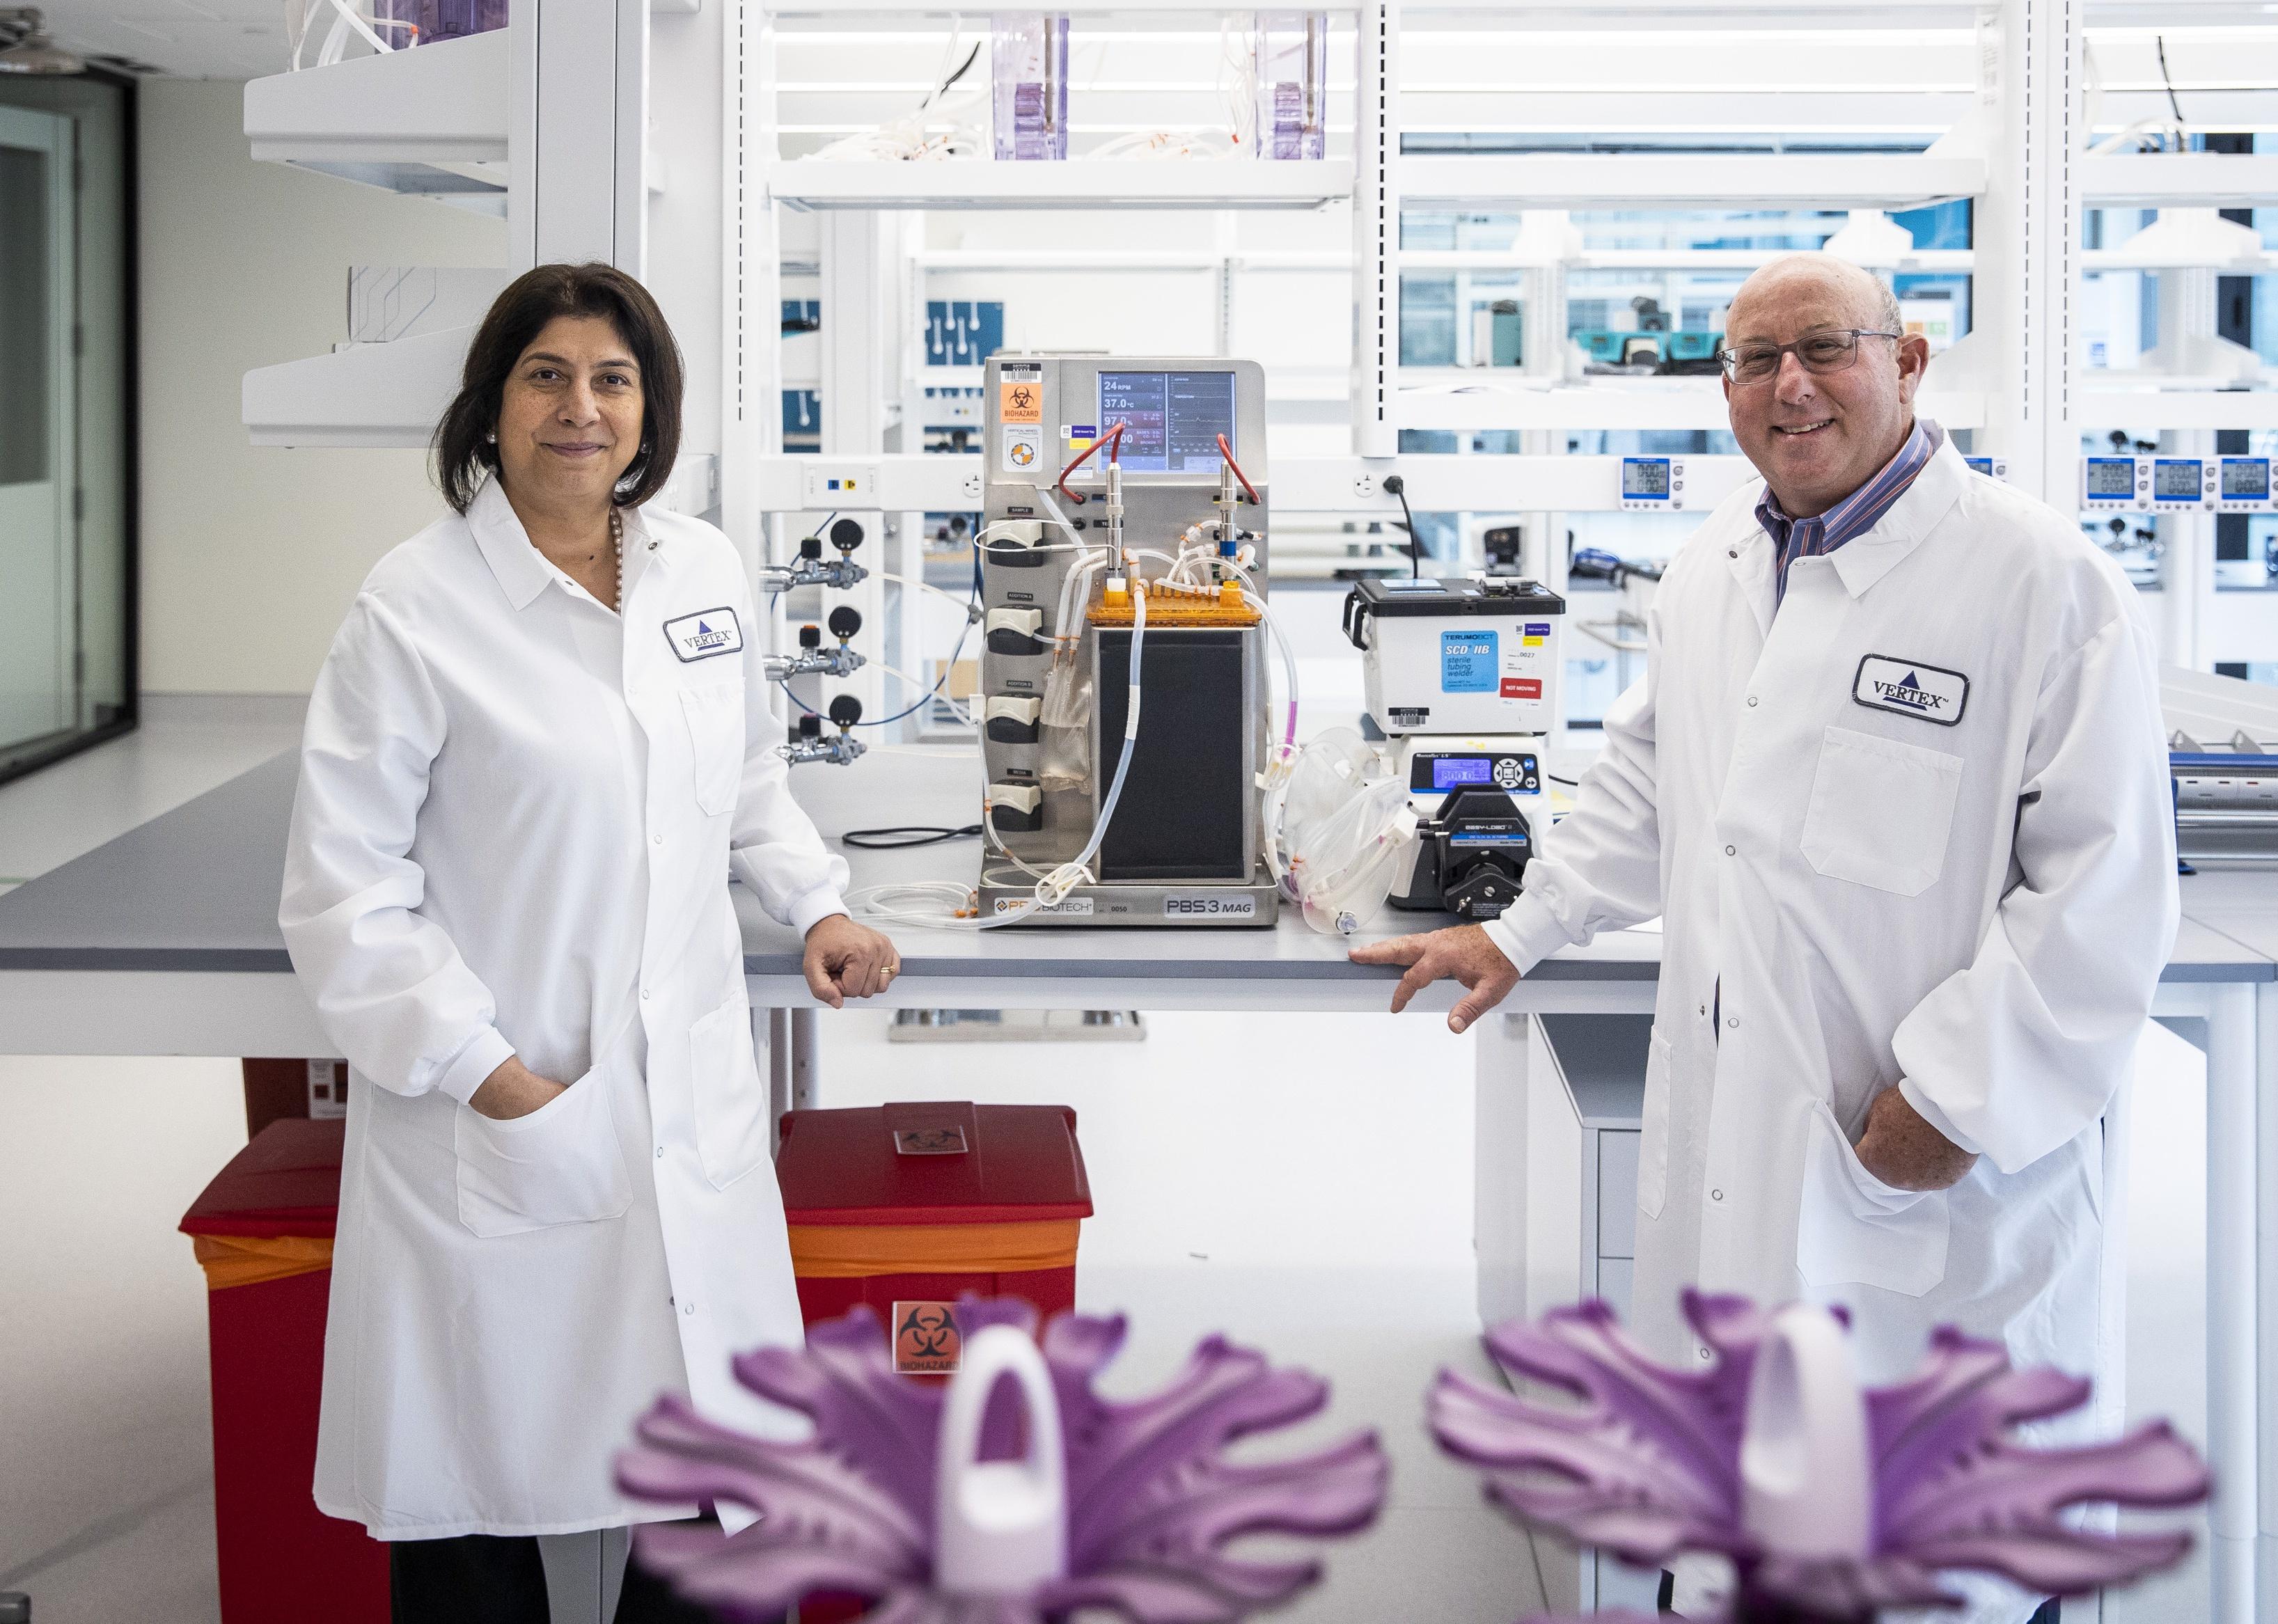 Reshma Kewalramani, left and Jeff Leiden, both wearing white lab coats, pose for a portrait with one of their bioreactors.